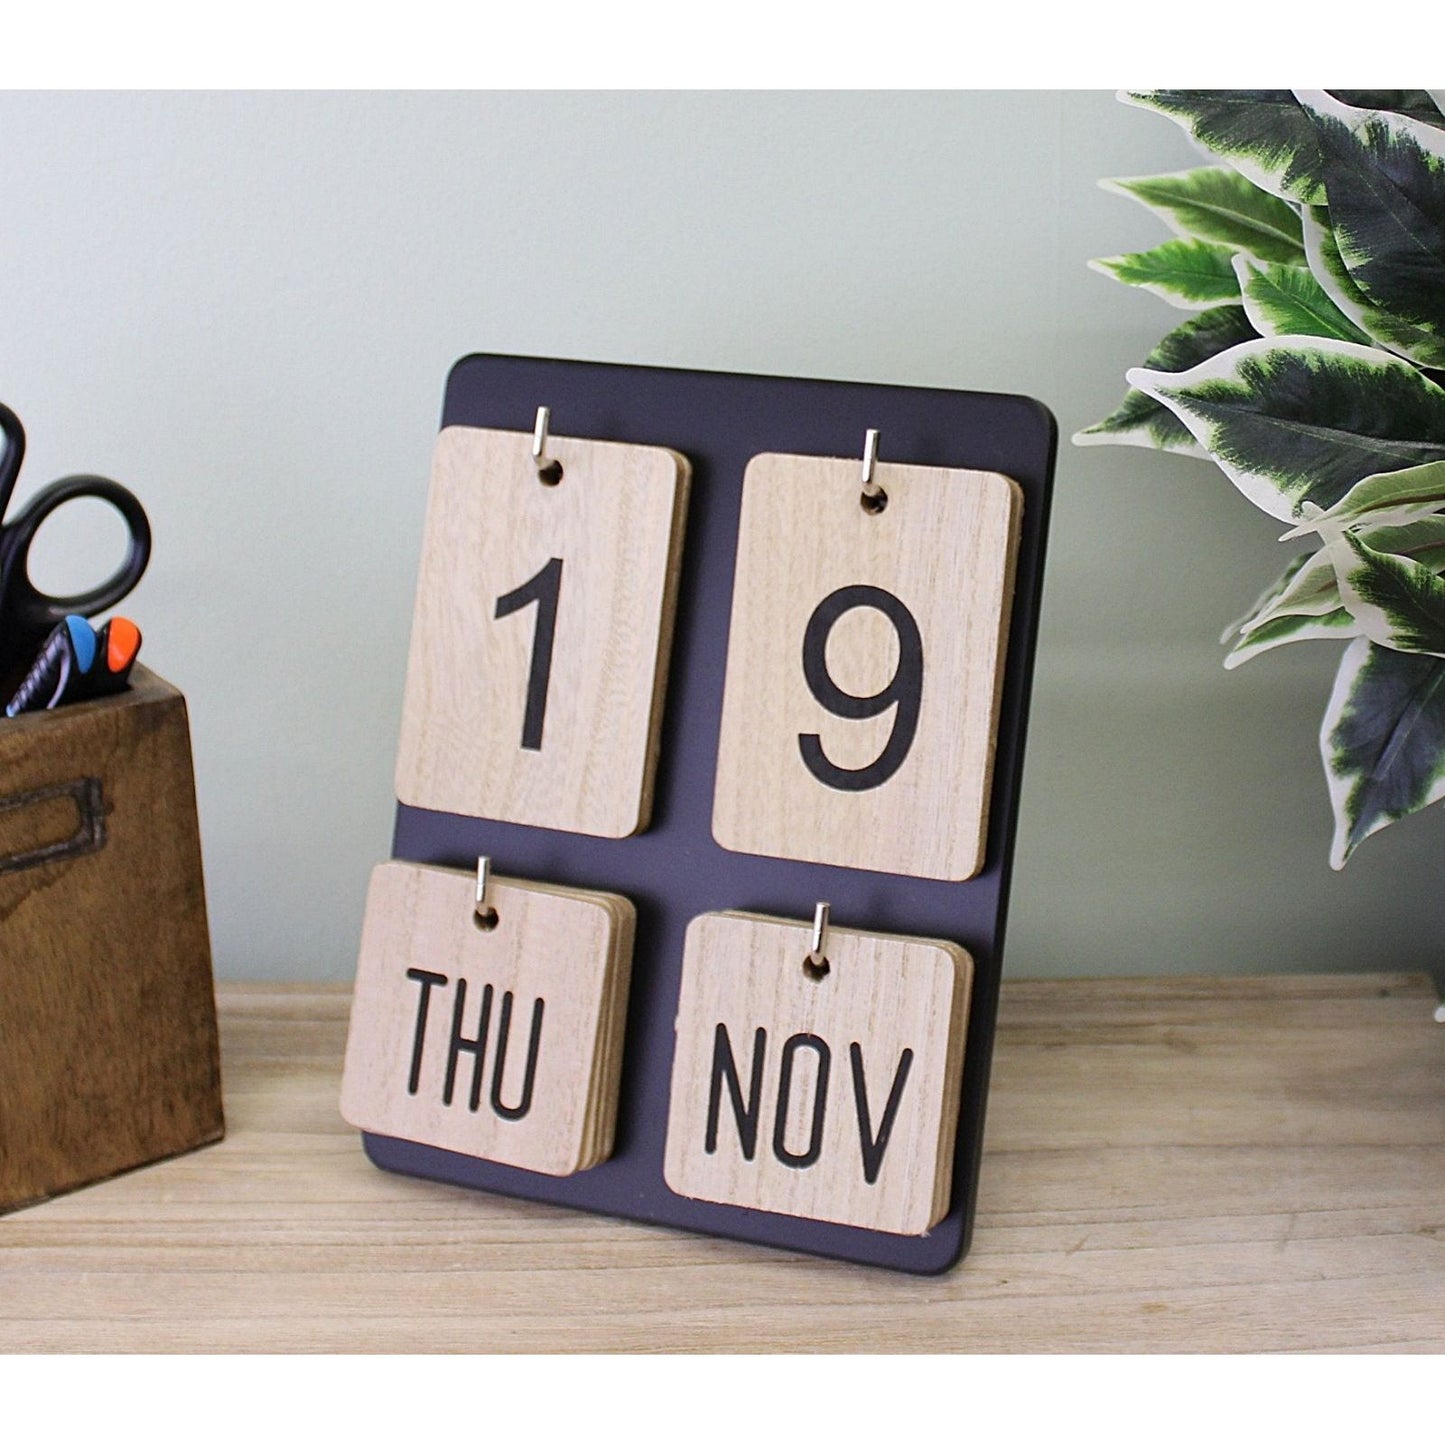 Wooden Freestanding Photo Frame Style Perpetual Calendar - Ashton and Finch